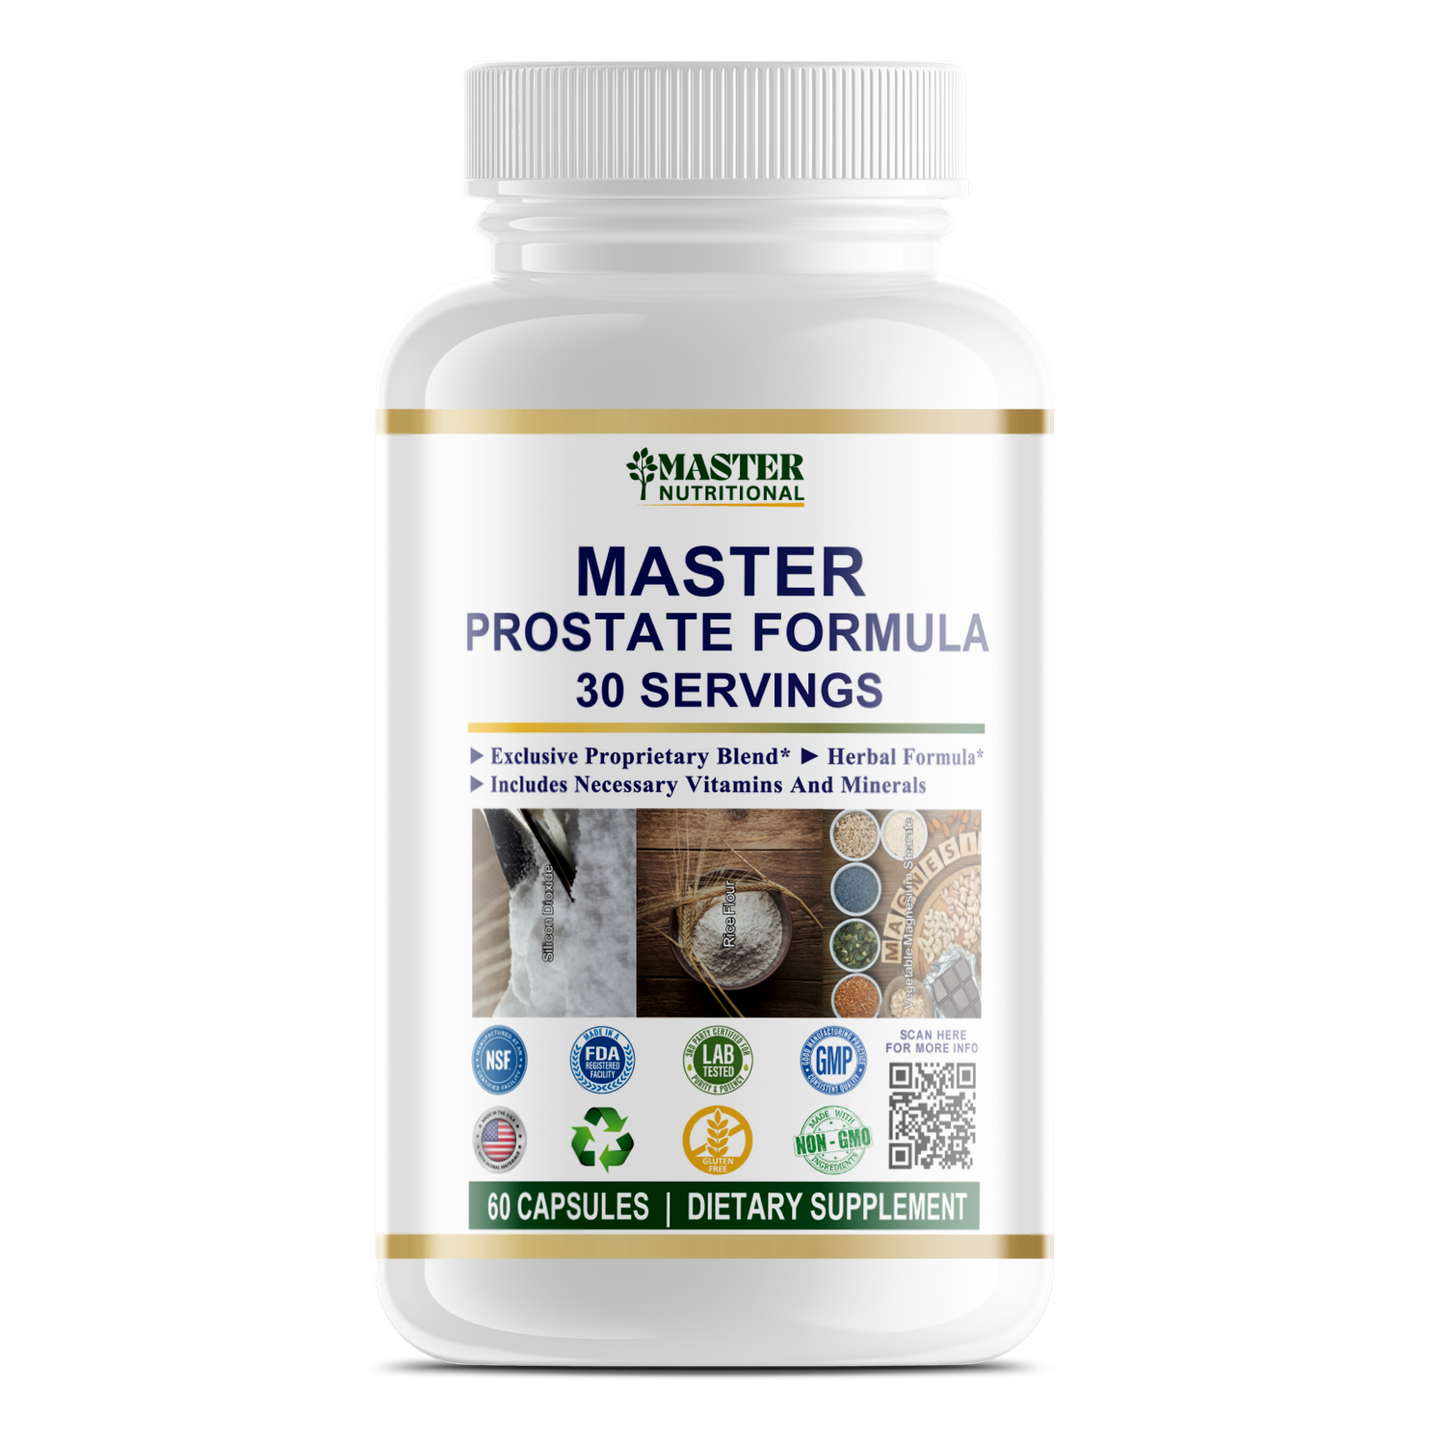 Master Prostate Formula for a Natural and Effective Approach to Prostate Health